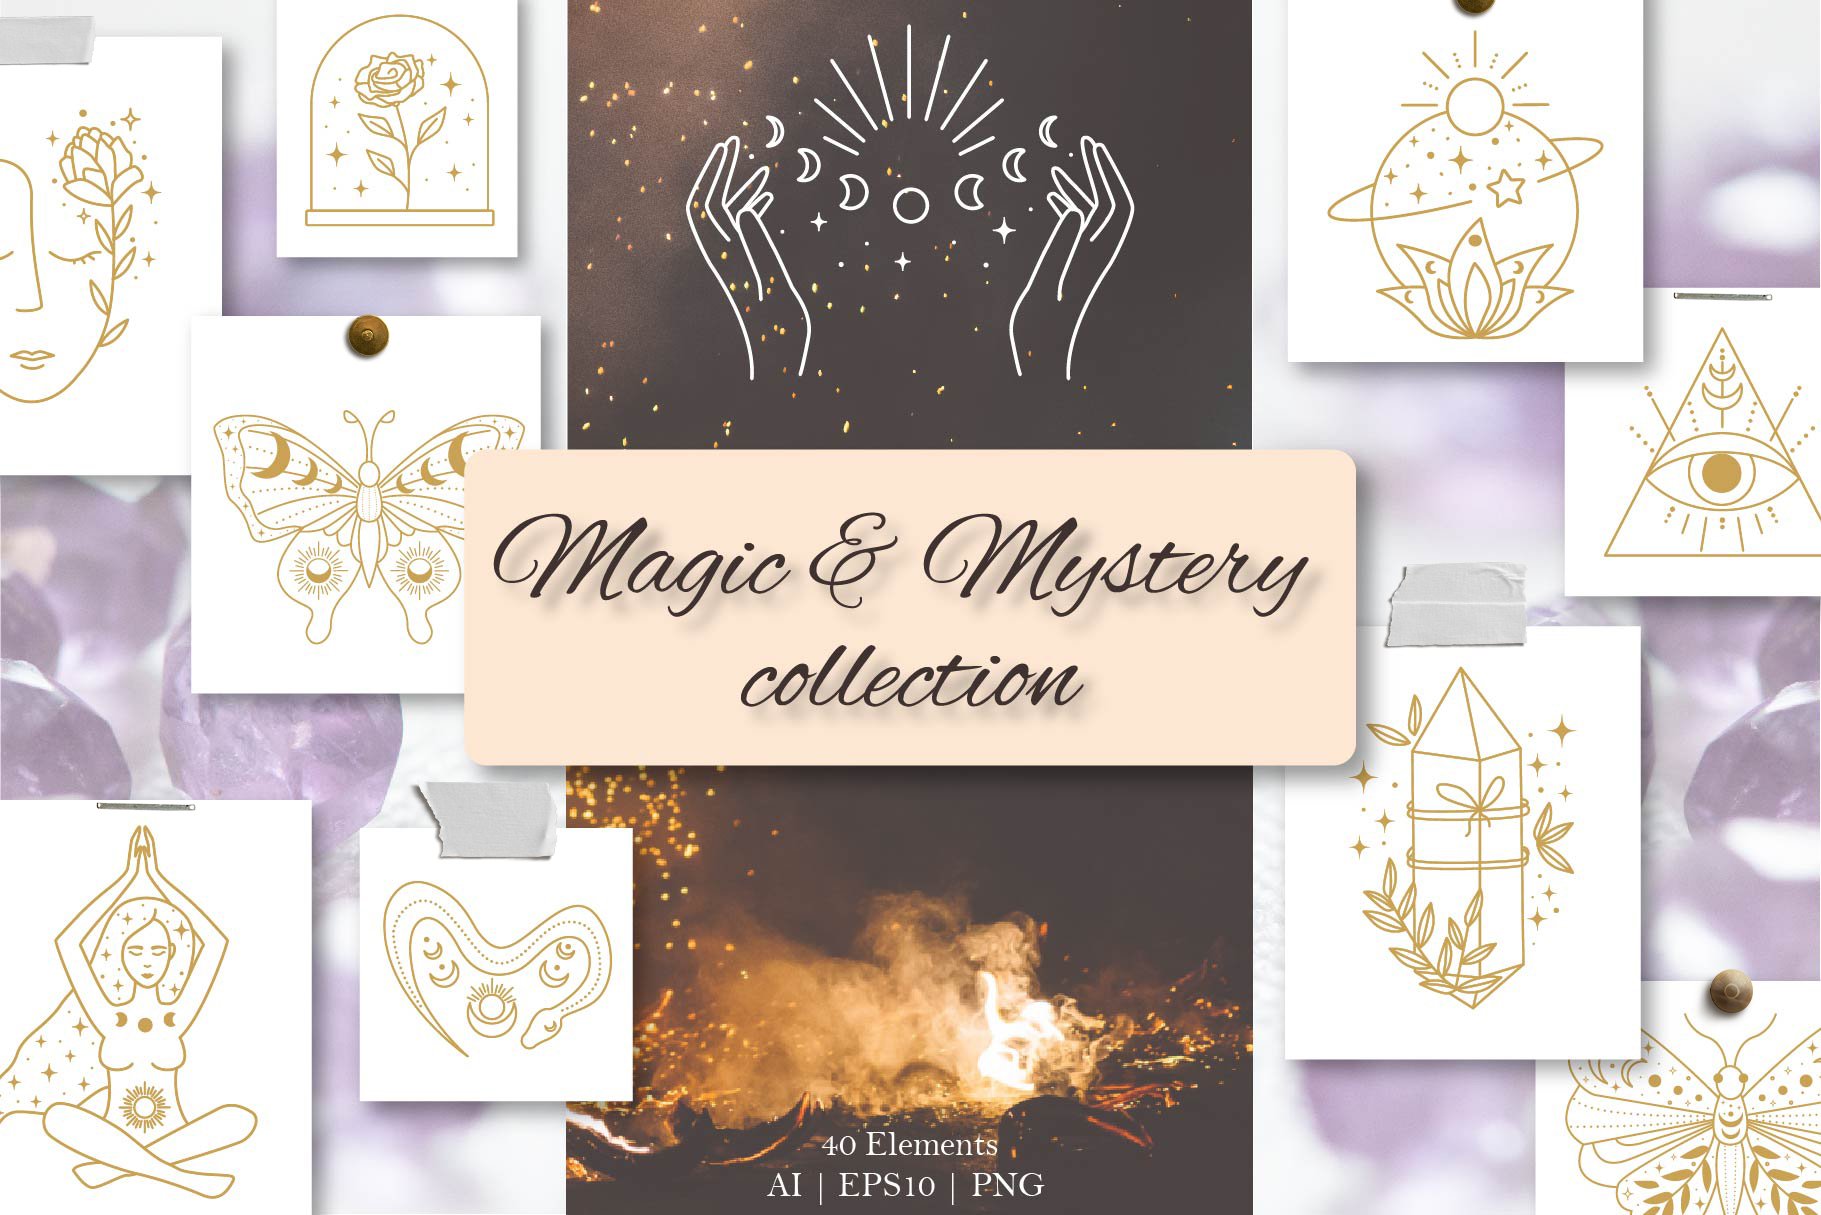 Magic & Mystery collection cover image.